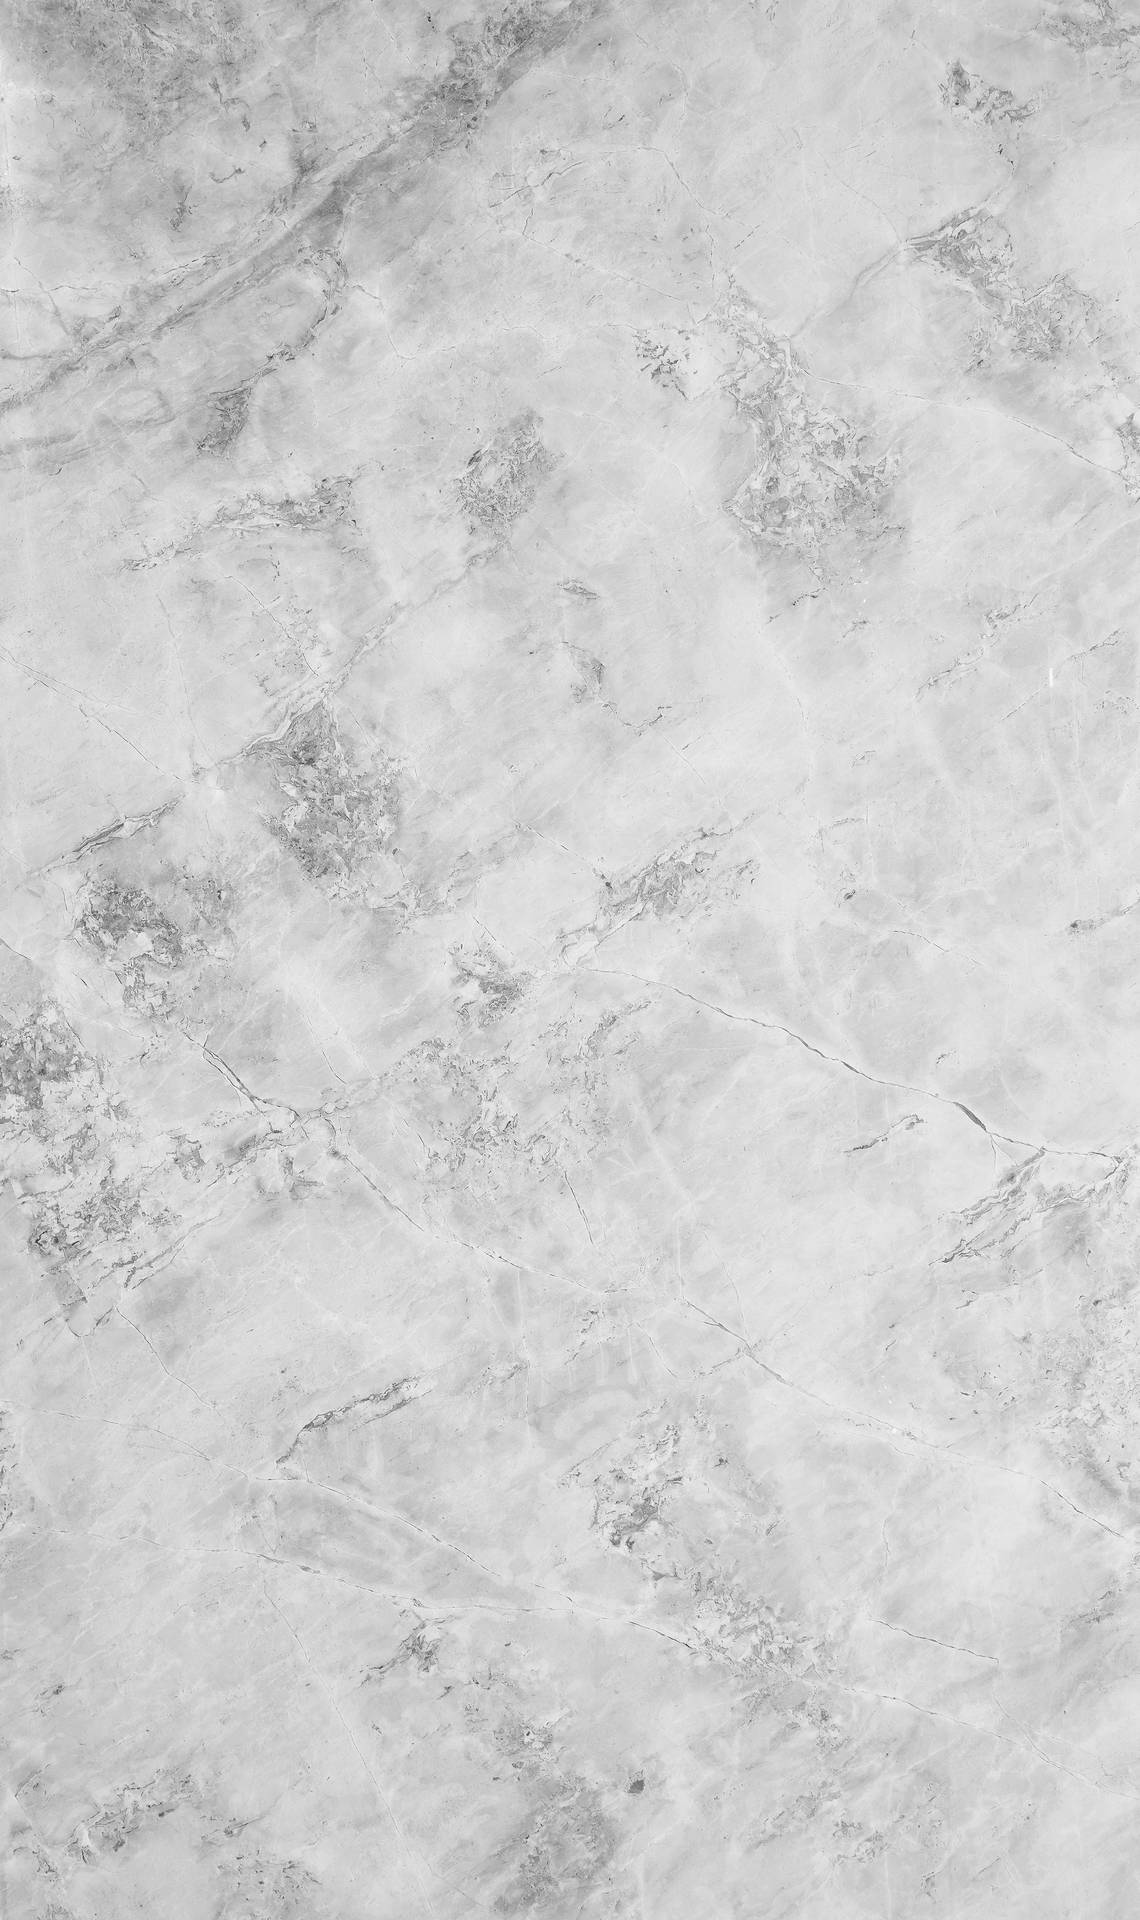 White marble featuring a classic design Wallpaper